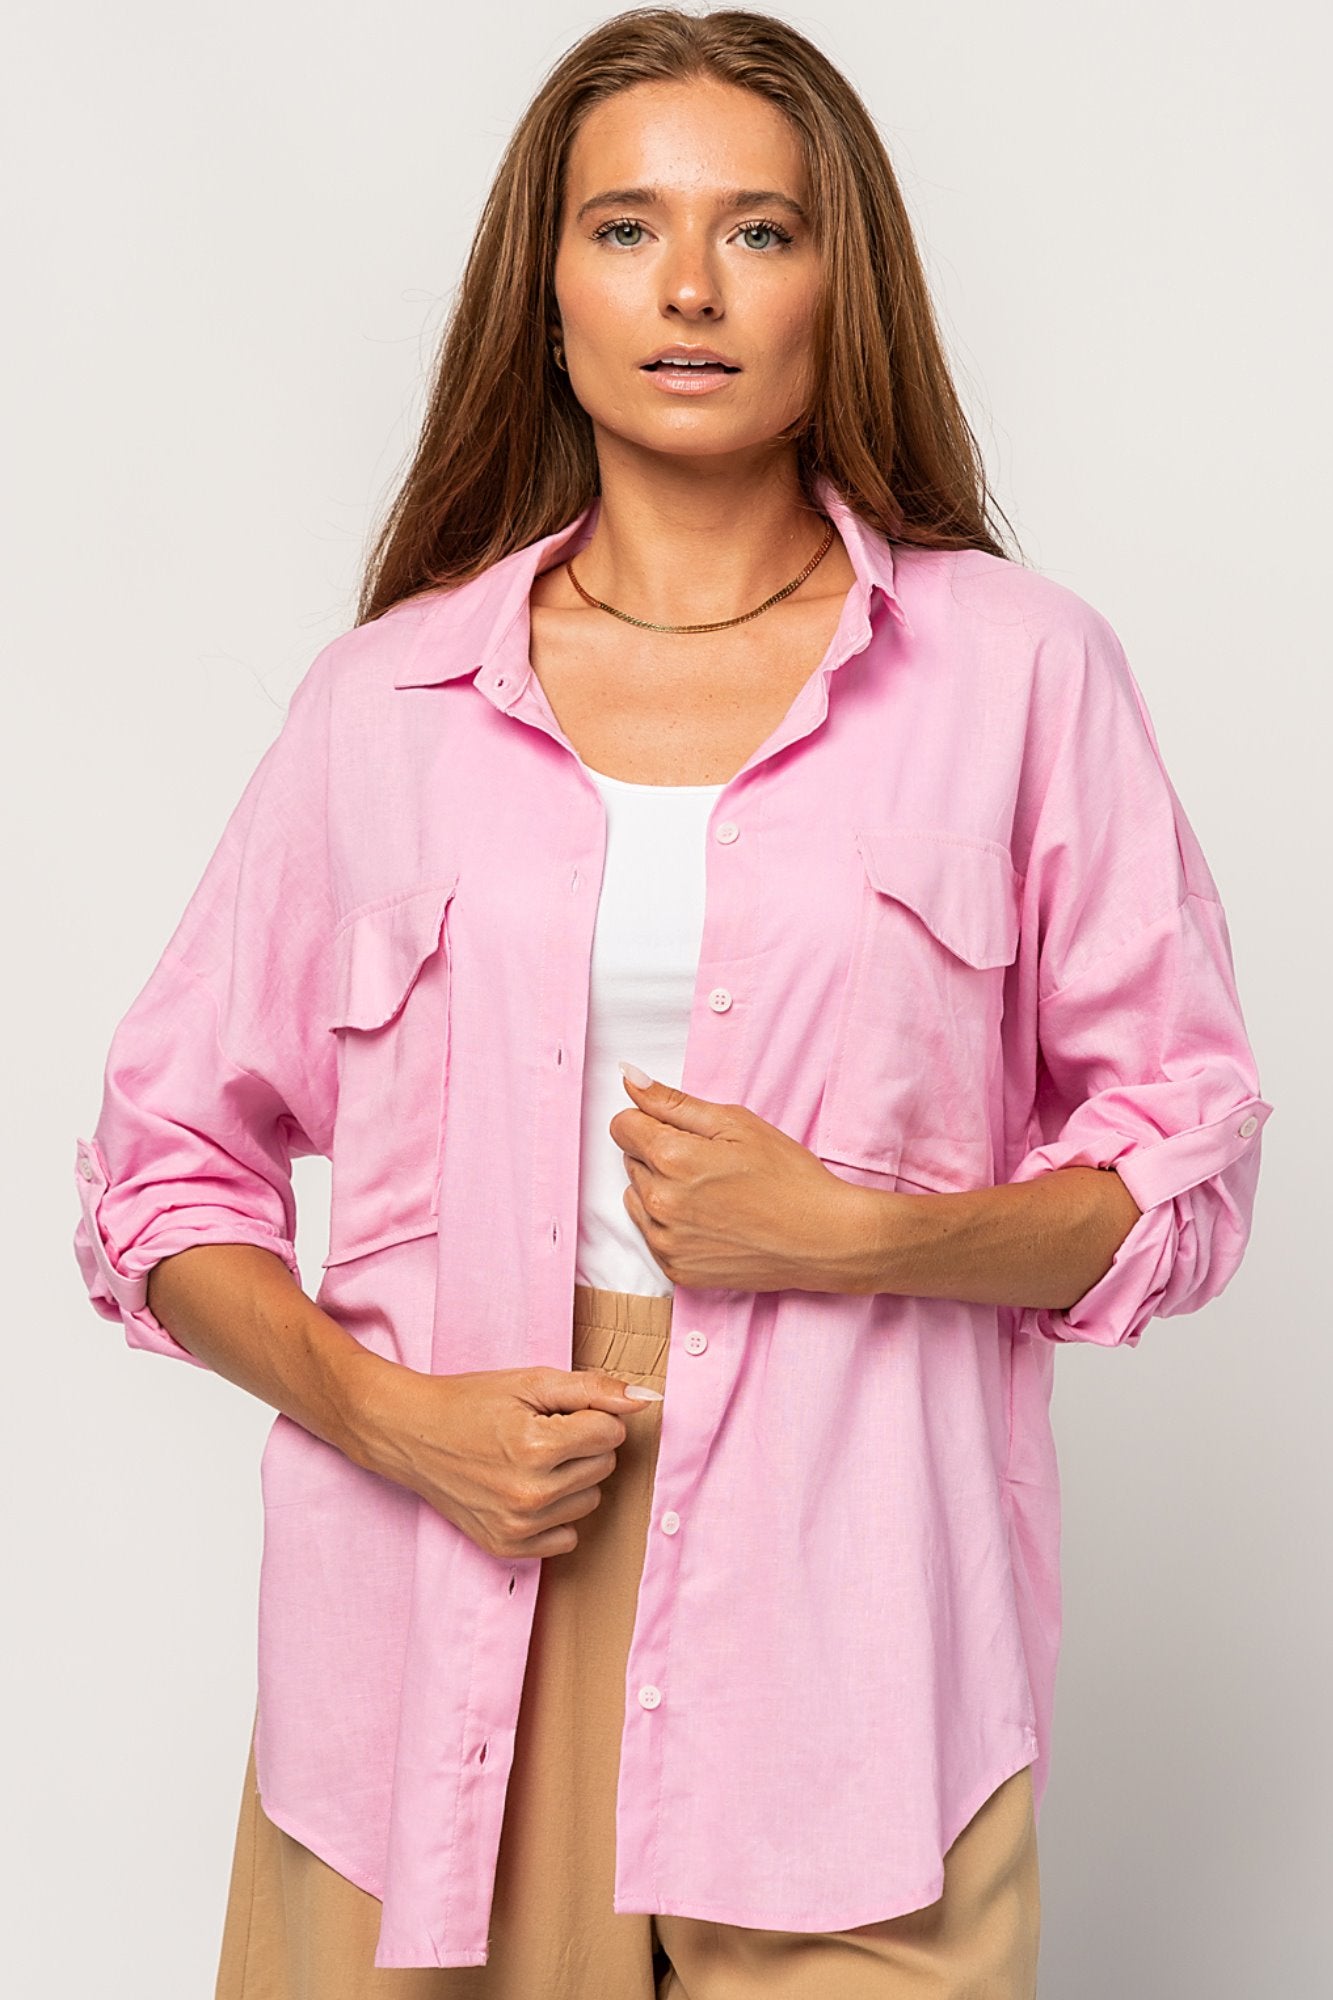 Cleo Top in Pink Holley Girl 